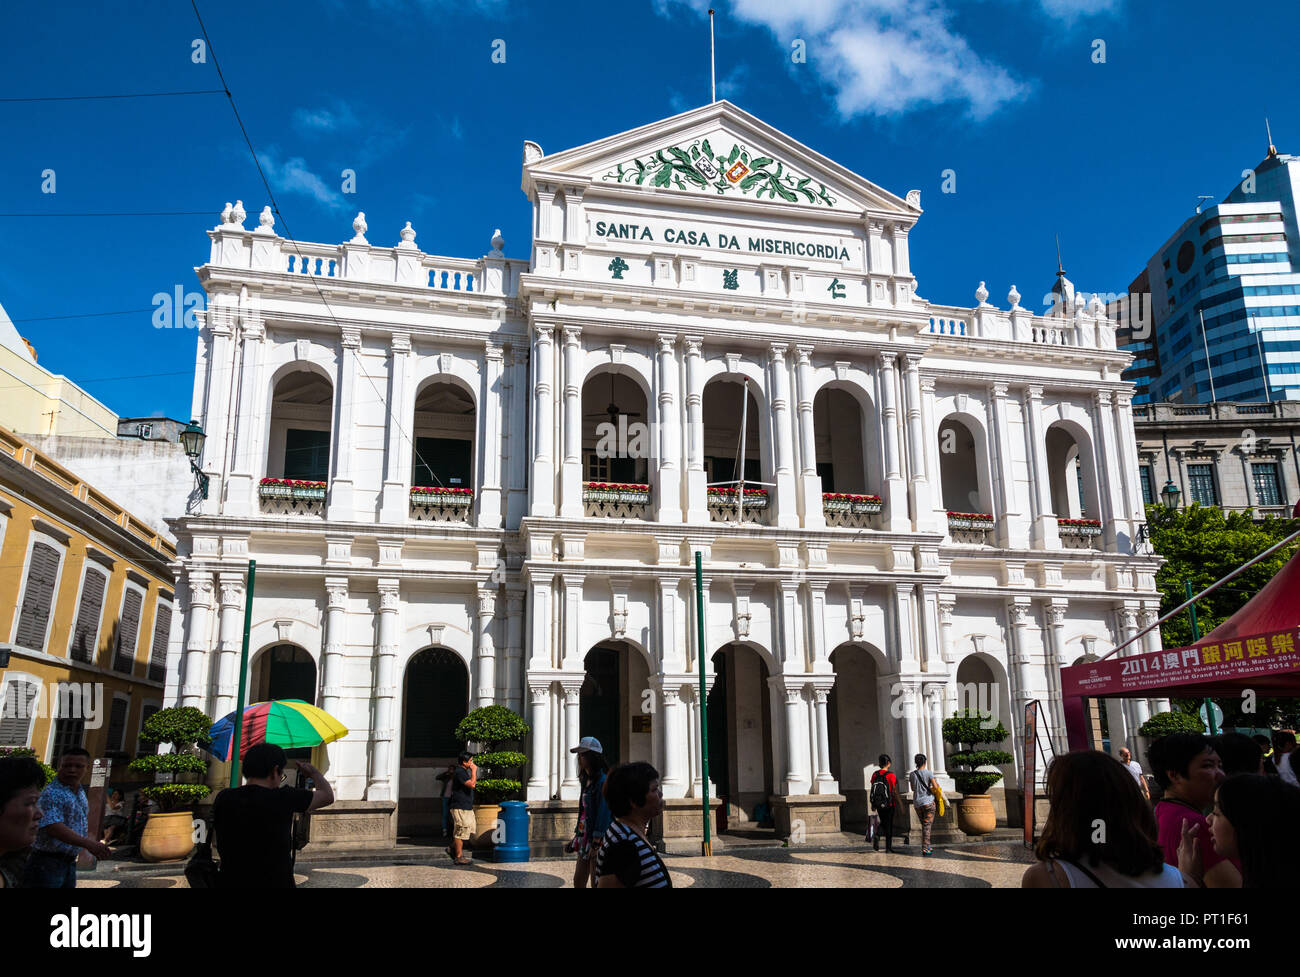 Macau, China - JULY 11, 2014: The facade of the Holy House of Mercy of Macau, a Neoclassical-style building in Senado Square, right in the city centre... Stock Photo